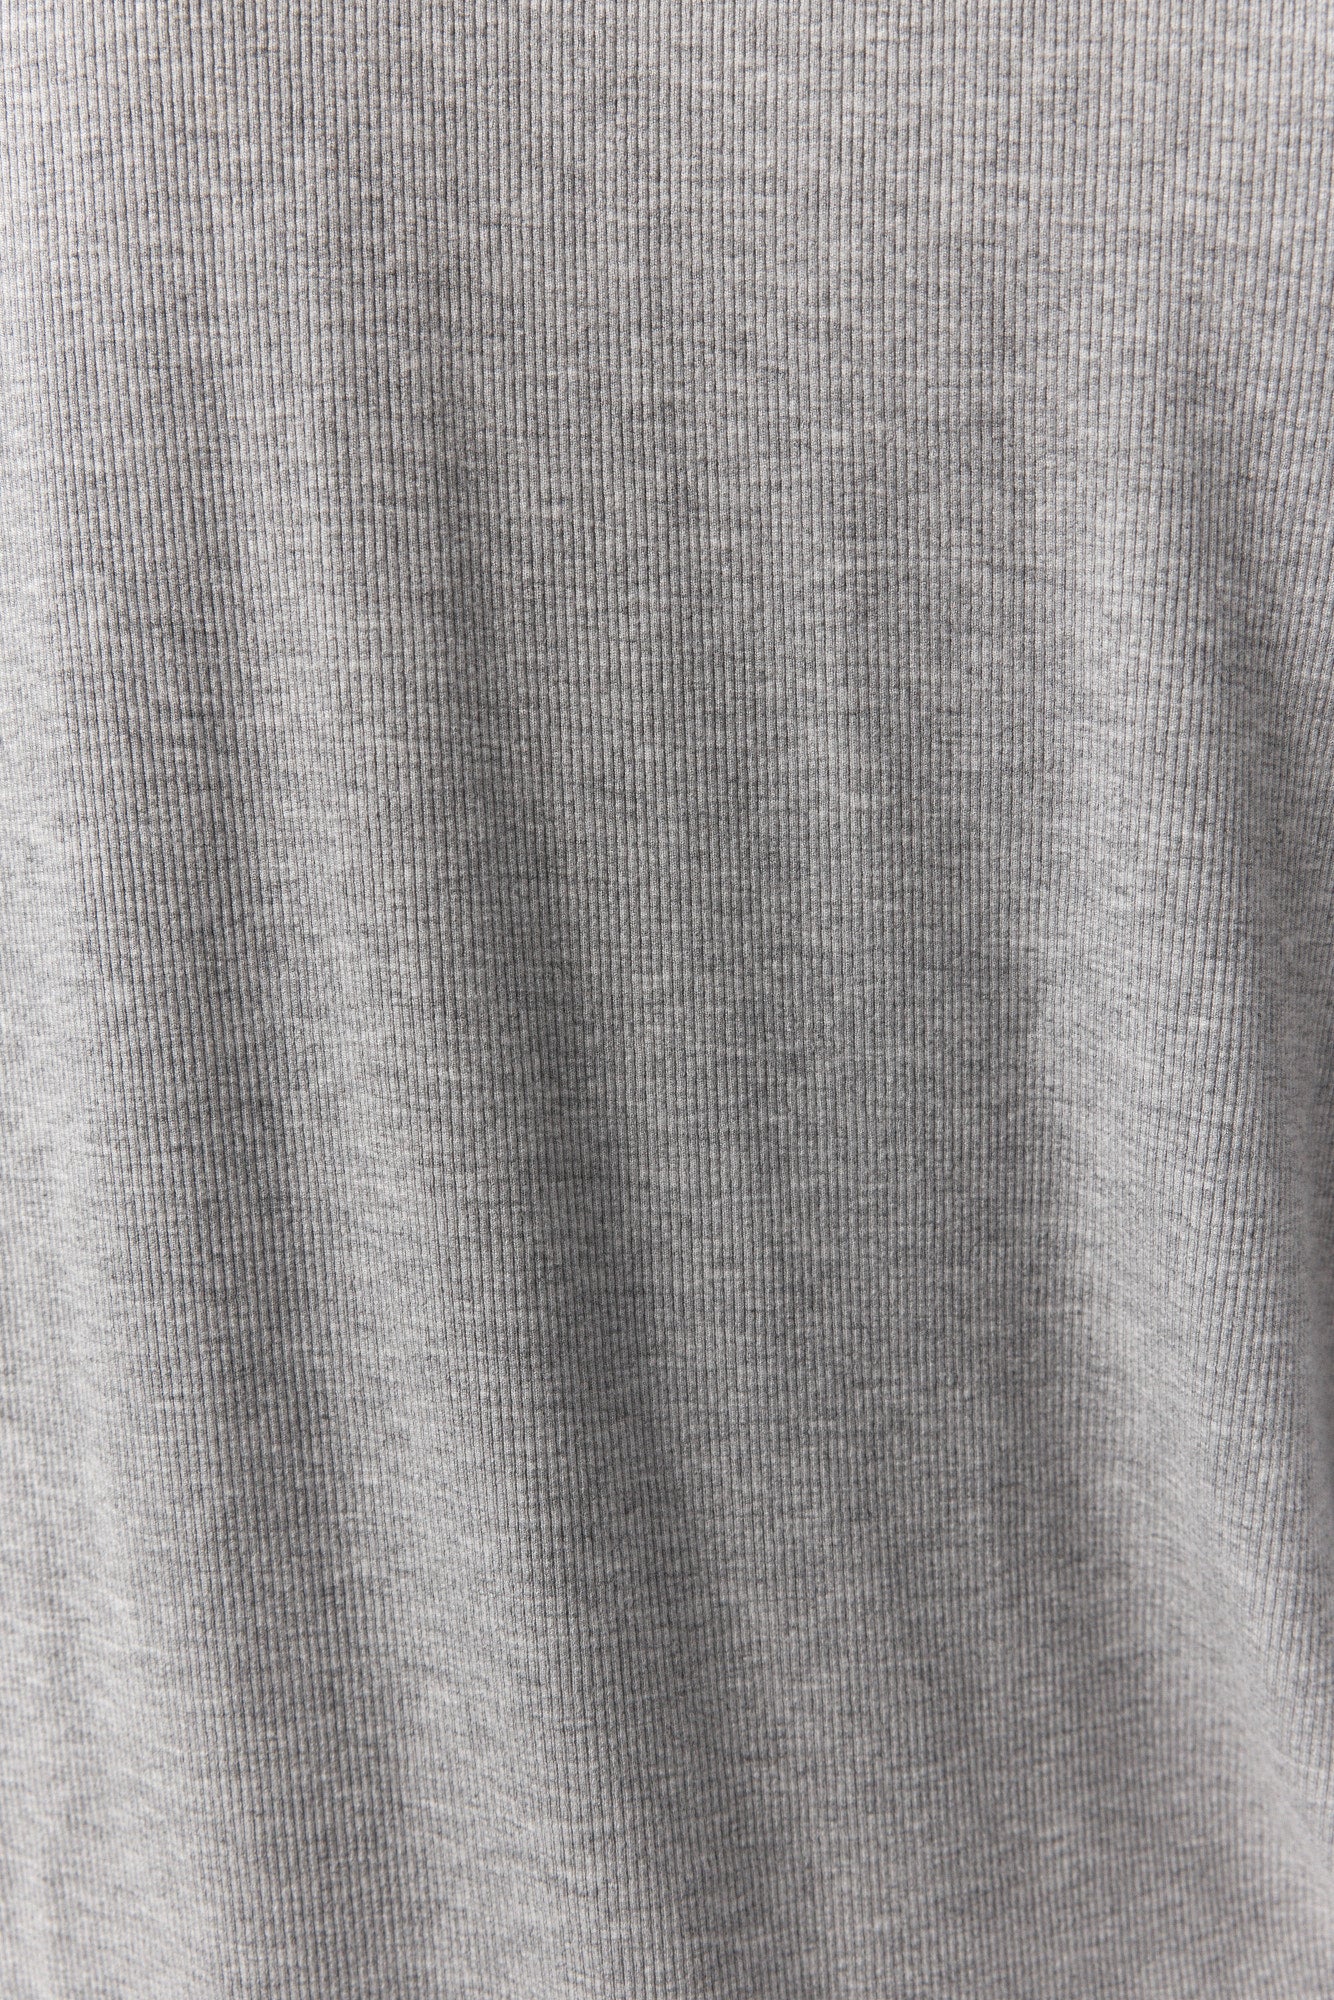 Textured gray sweater | Begonia